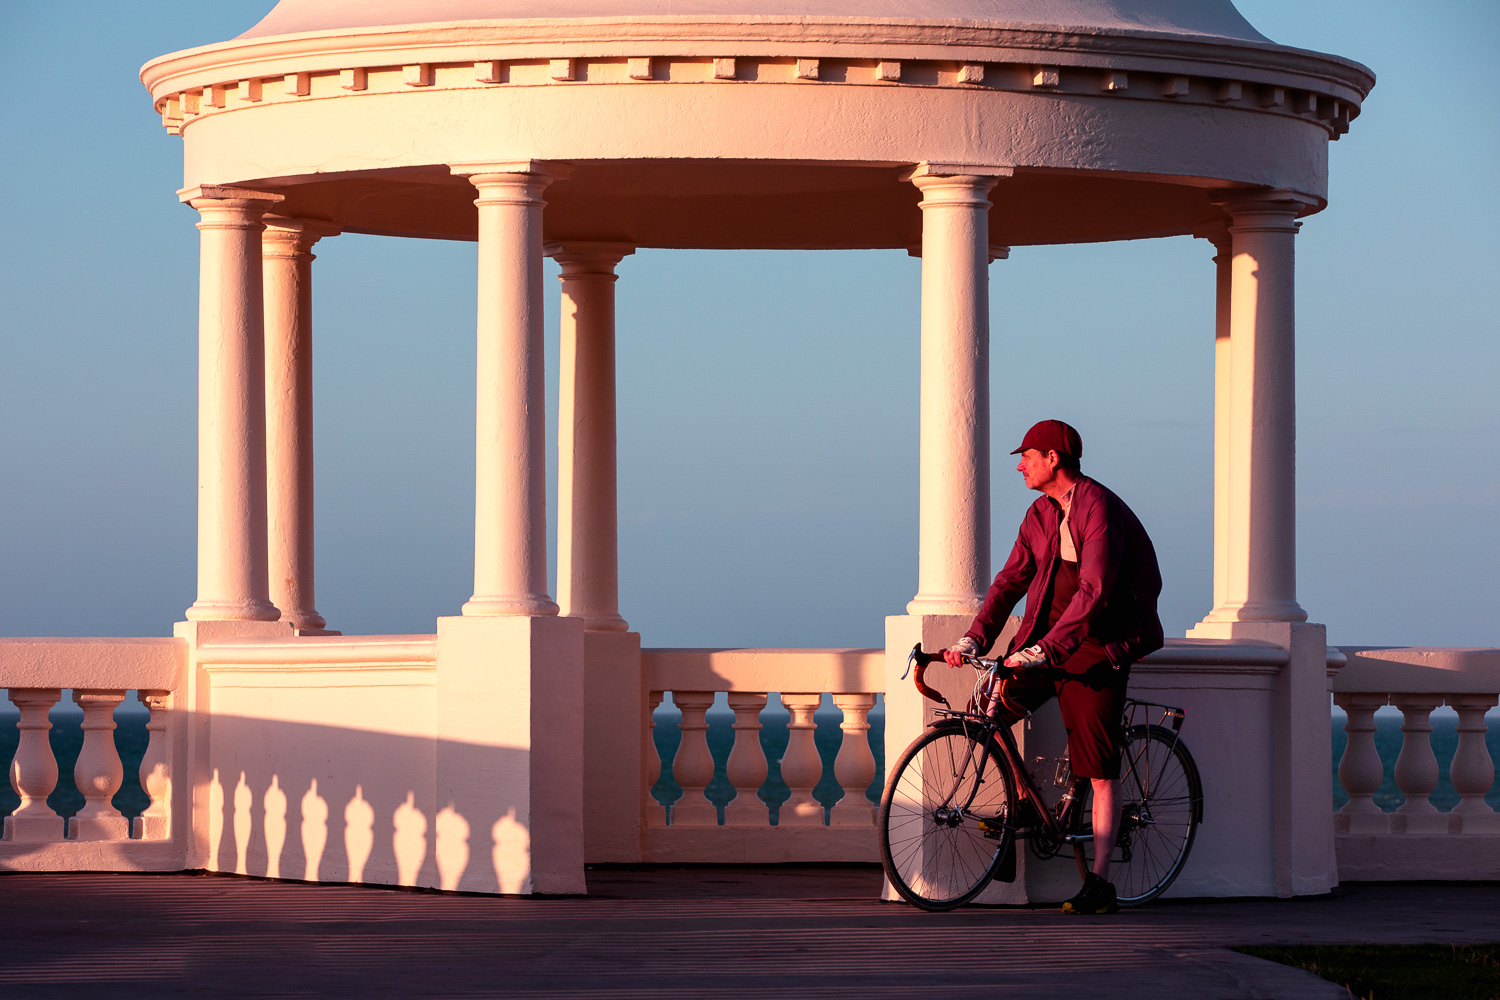 Cyclist and photographer Roff Smith poses with his classic touring bicycle by the Tuscan pillars and neoclassic dome of the King George V Colonnade on the seafront at Bexhill on Sea at dawn on a fine summer morning